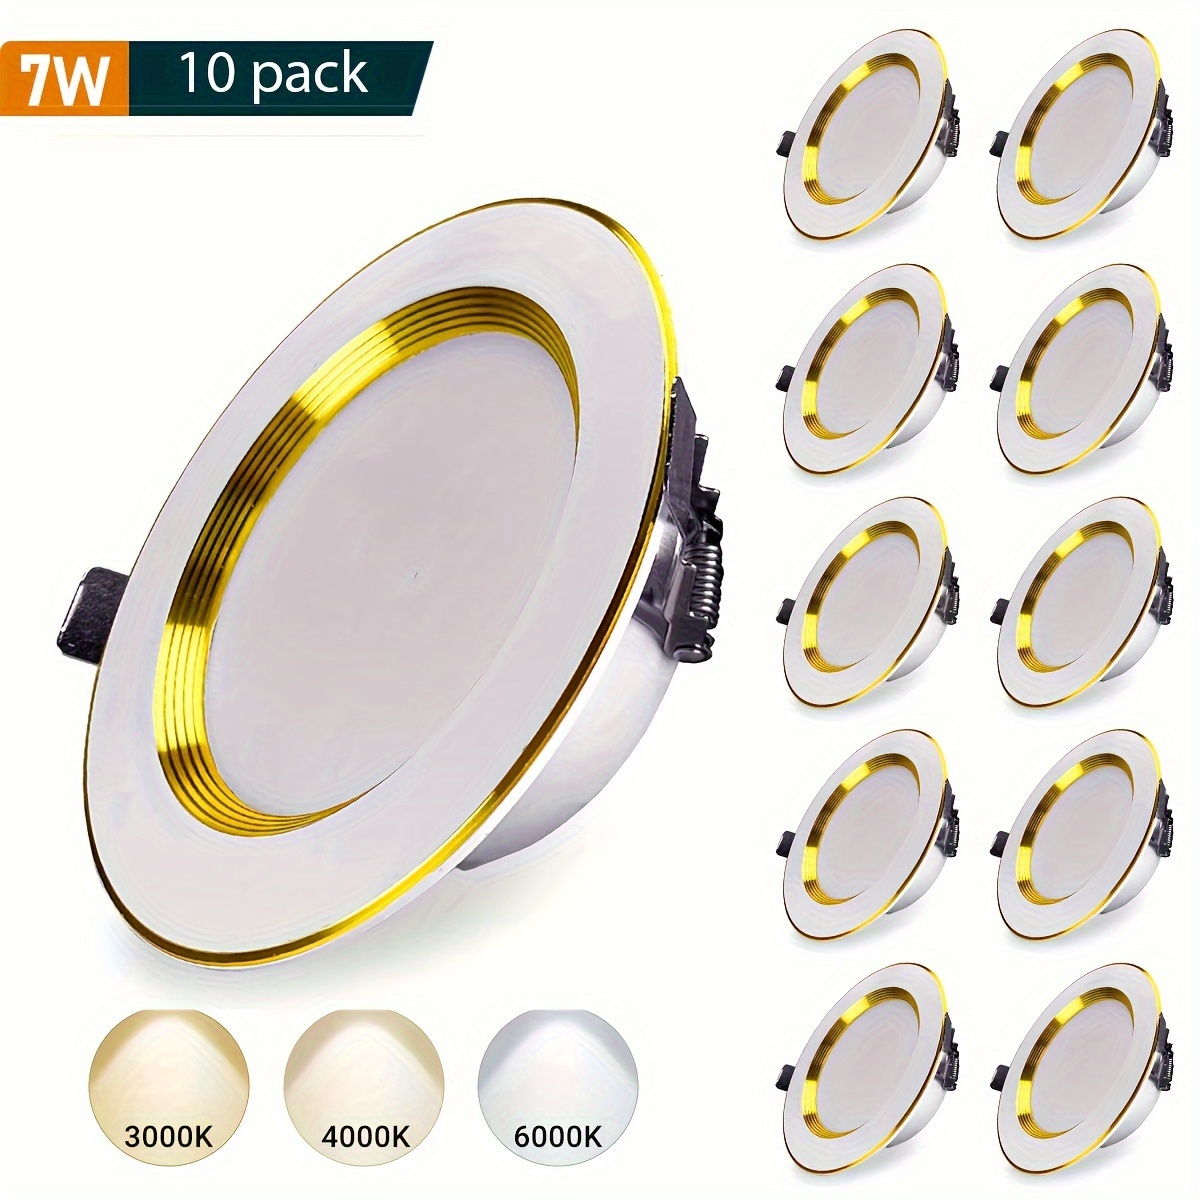 

10 Packs 4 Inch Led Recessed Ceiling Light, Baffle Trim, Dimmable, 7w=60w, 3000k/4000k/6000k 3 Color Dimming, 650 Lm, Damp Rated, Simple Retrofit Installation -no Flicker